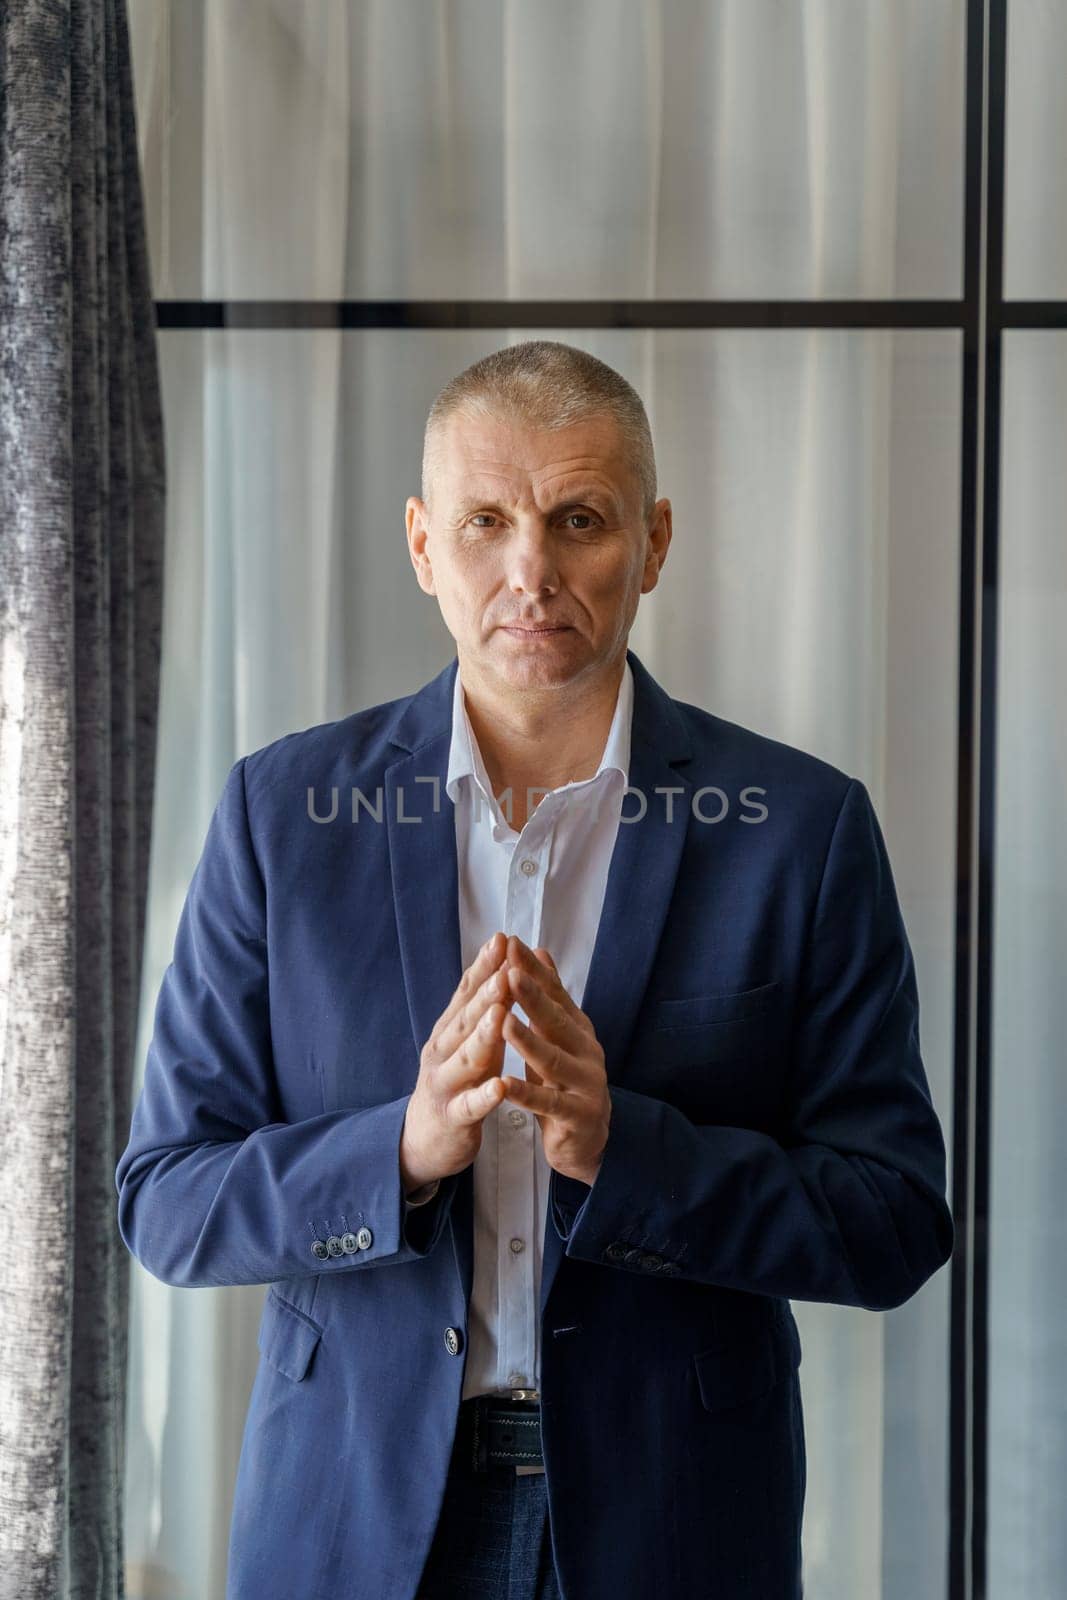 Portrait of a mature calm businessman with his jacket unbuttoned and palms folded in front.